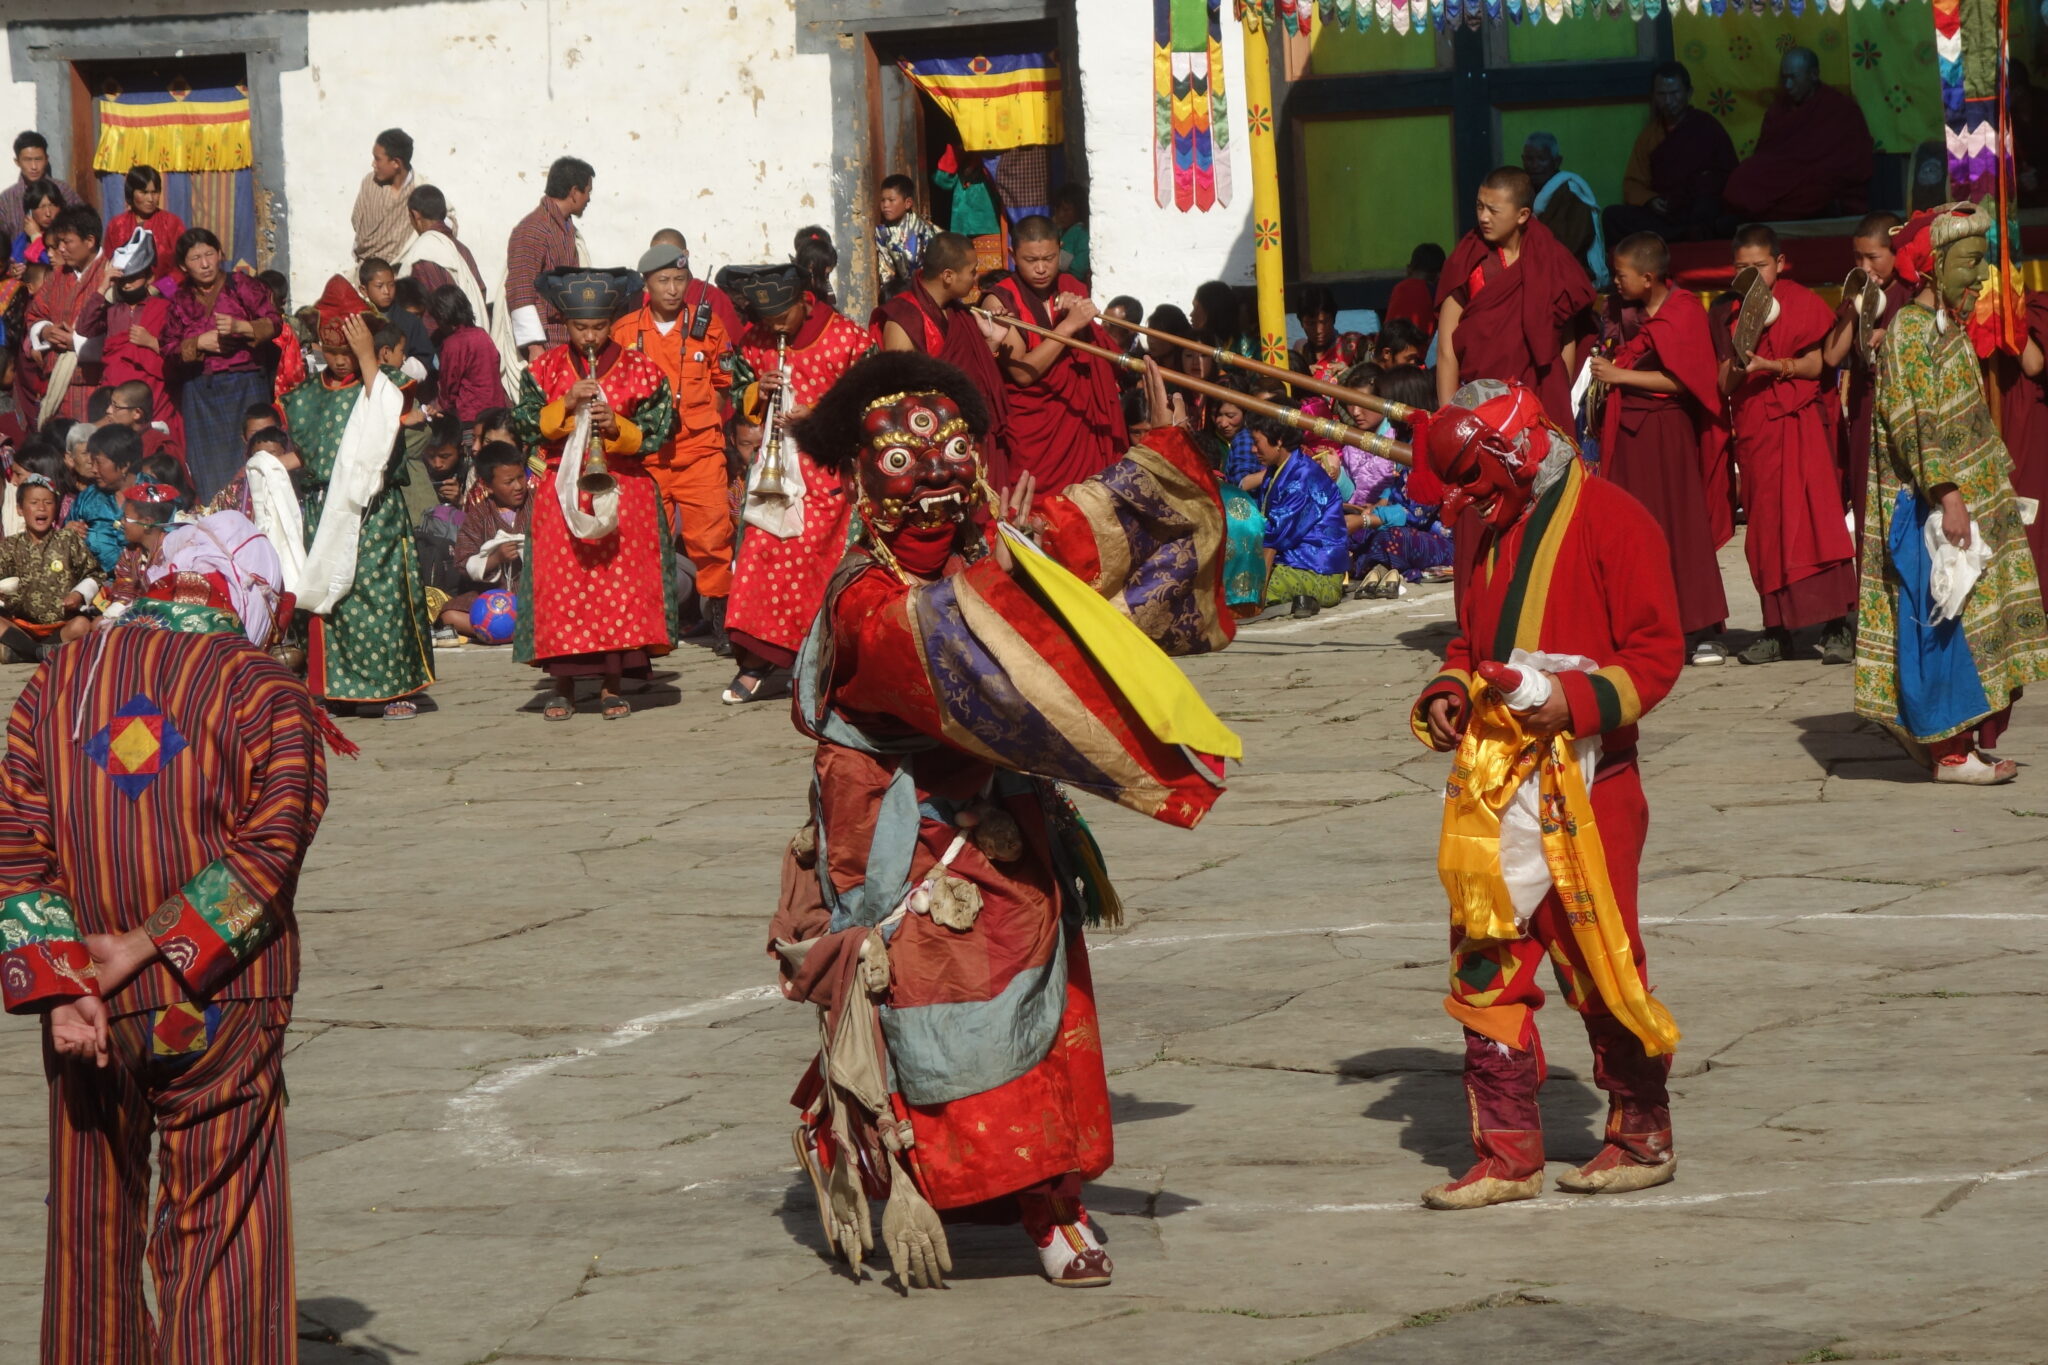 Two performers dressed in red masks and flowing garments dance before musicians in forecourt of building